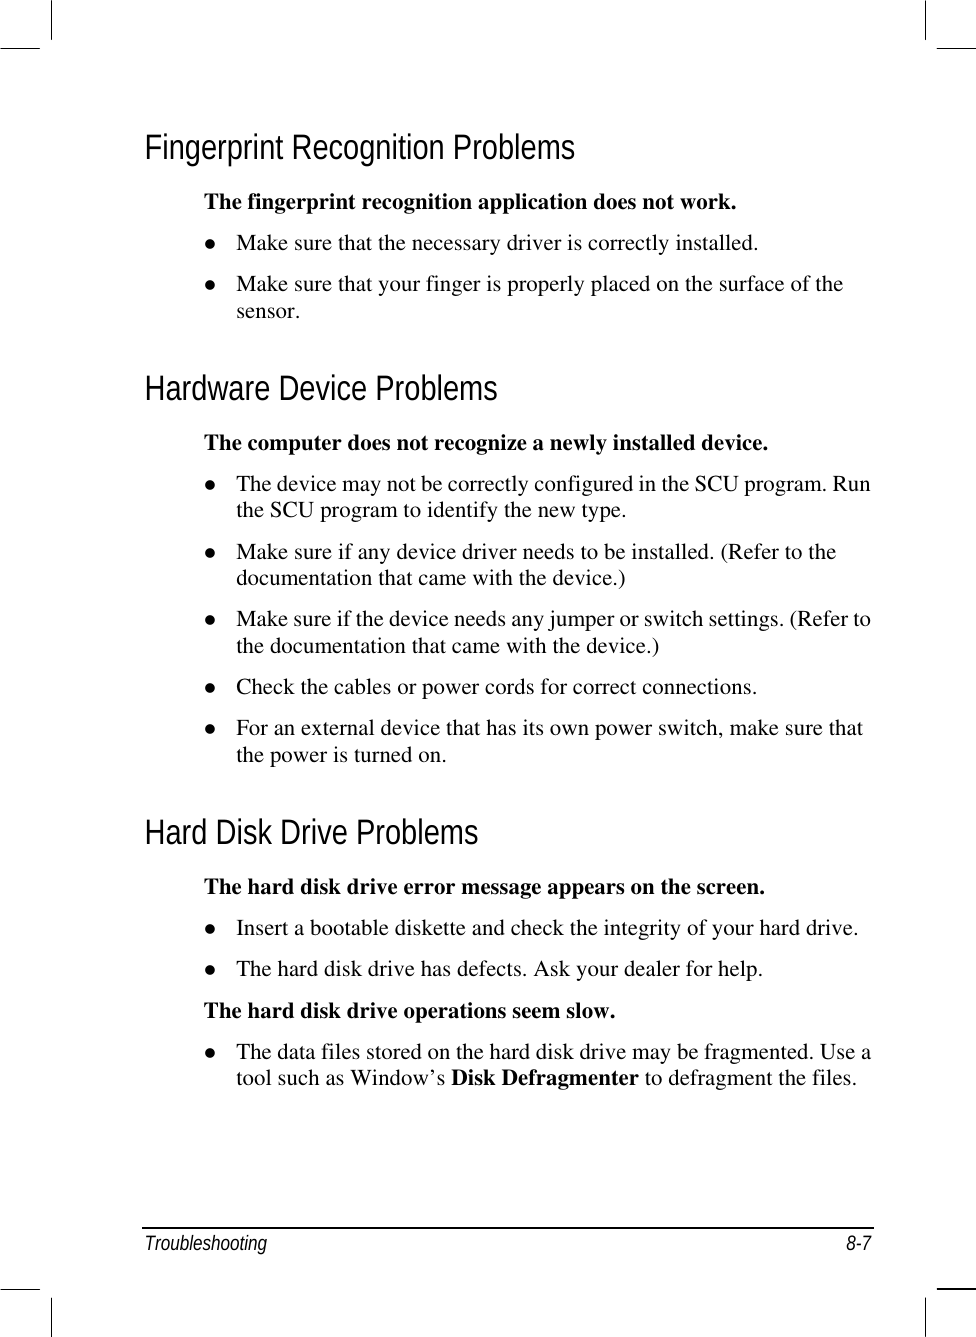  Troubleshooting 8-7 Fingerprint Recognition Problems The fingerprint recognition application does not work.   Make sure that the necessary driver is correctly installed.   Make sure that your finger is properly placed on the surface of the sensor. Hardware Device Problems The computer does not recognize a newly installed device.   The device may not be correctly configured in the SCU program. Run the SCU program to identify the new type.   Make sure if any device driver needs to be installed. (Refer to the documentation that came with the device.)   Make sure if the device needs any jumper or switch settings. (Refer to the documentation that came with the device.)   Check the cables or power cords for correct connections.   For an external device that has its own power switch, make sure that the power is turned on. Hard Disk Drive Problems The hard disk drive error message appears on the screen.   Insert a bootable diskette and check the integrity of your hard drive.   The hard disk drive has defects. Ask your dealer for help. The hard disk drive operations seem slow.   The data files stored on the hard disk drive may be fragmented. Use a tool such as Window’s Disk Defragmenter to defragment the files. 